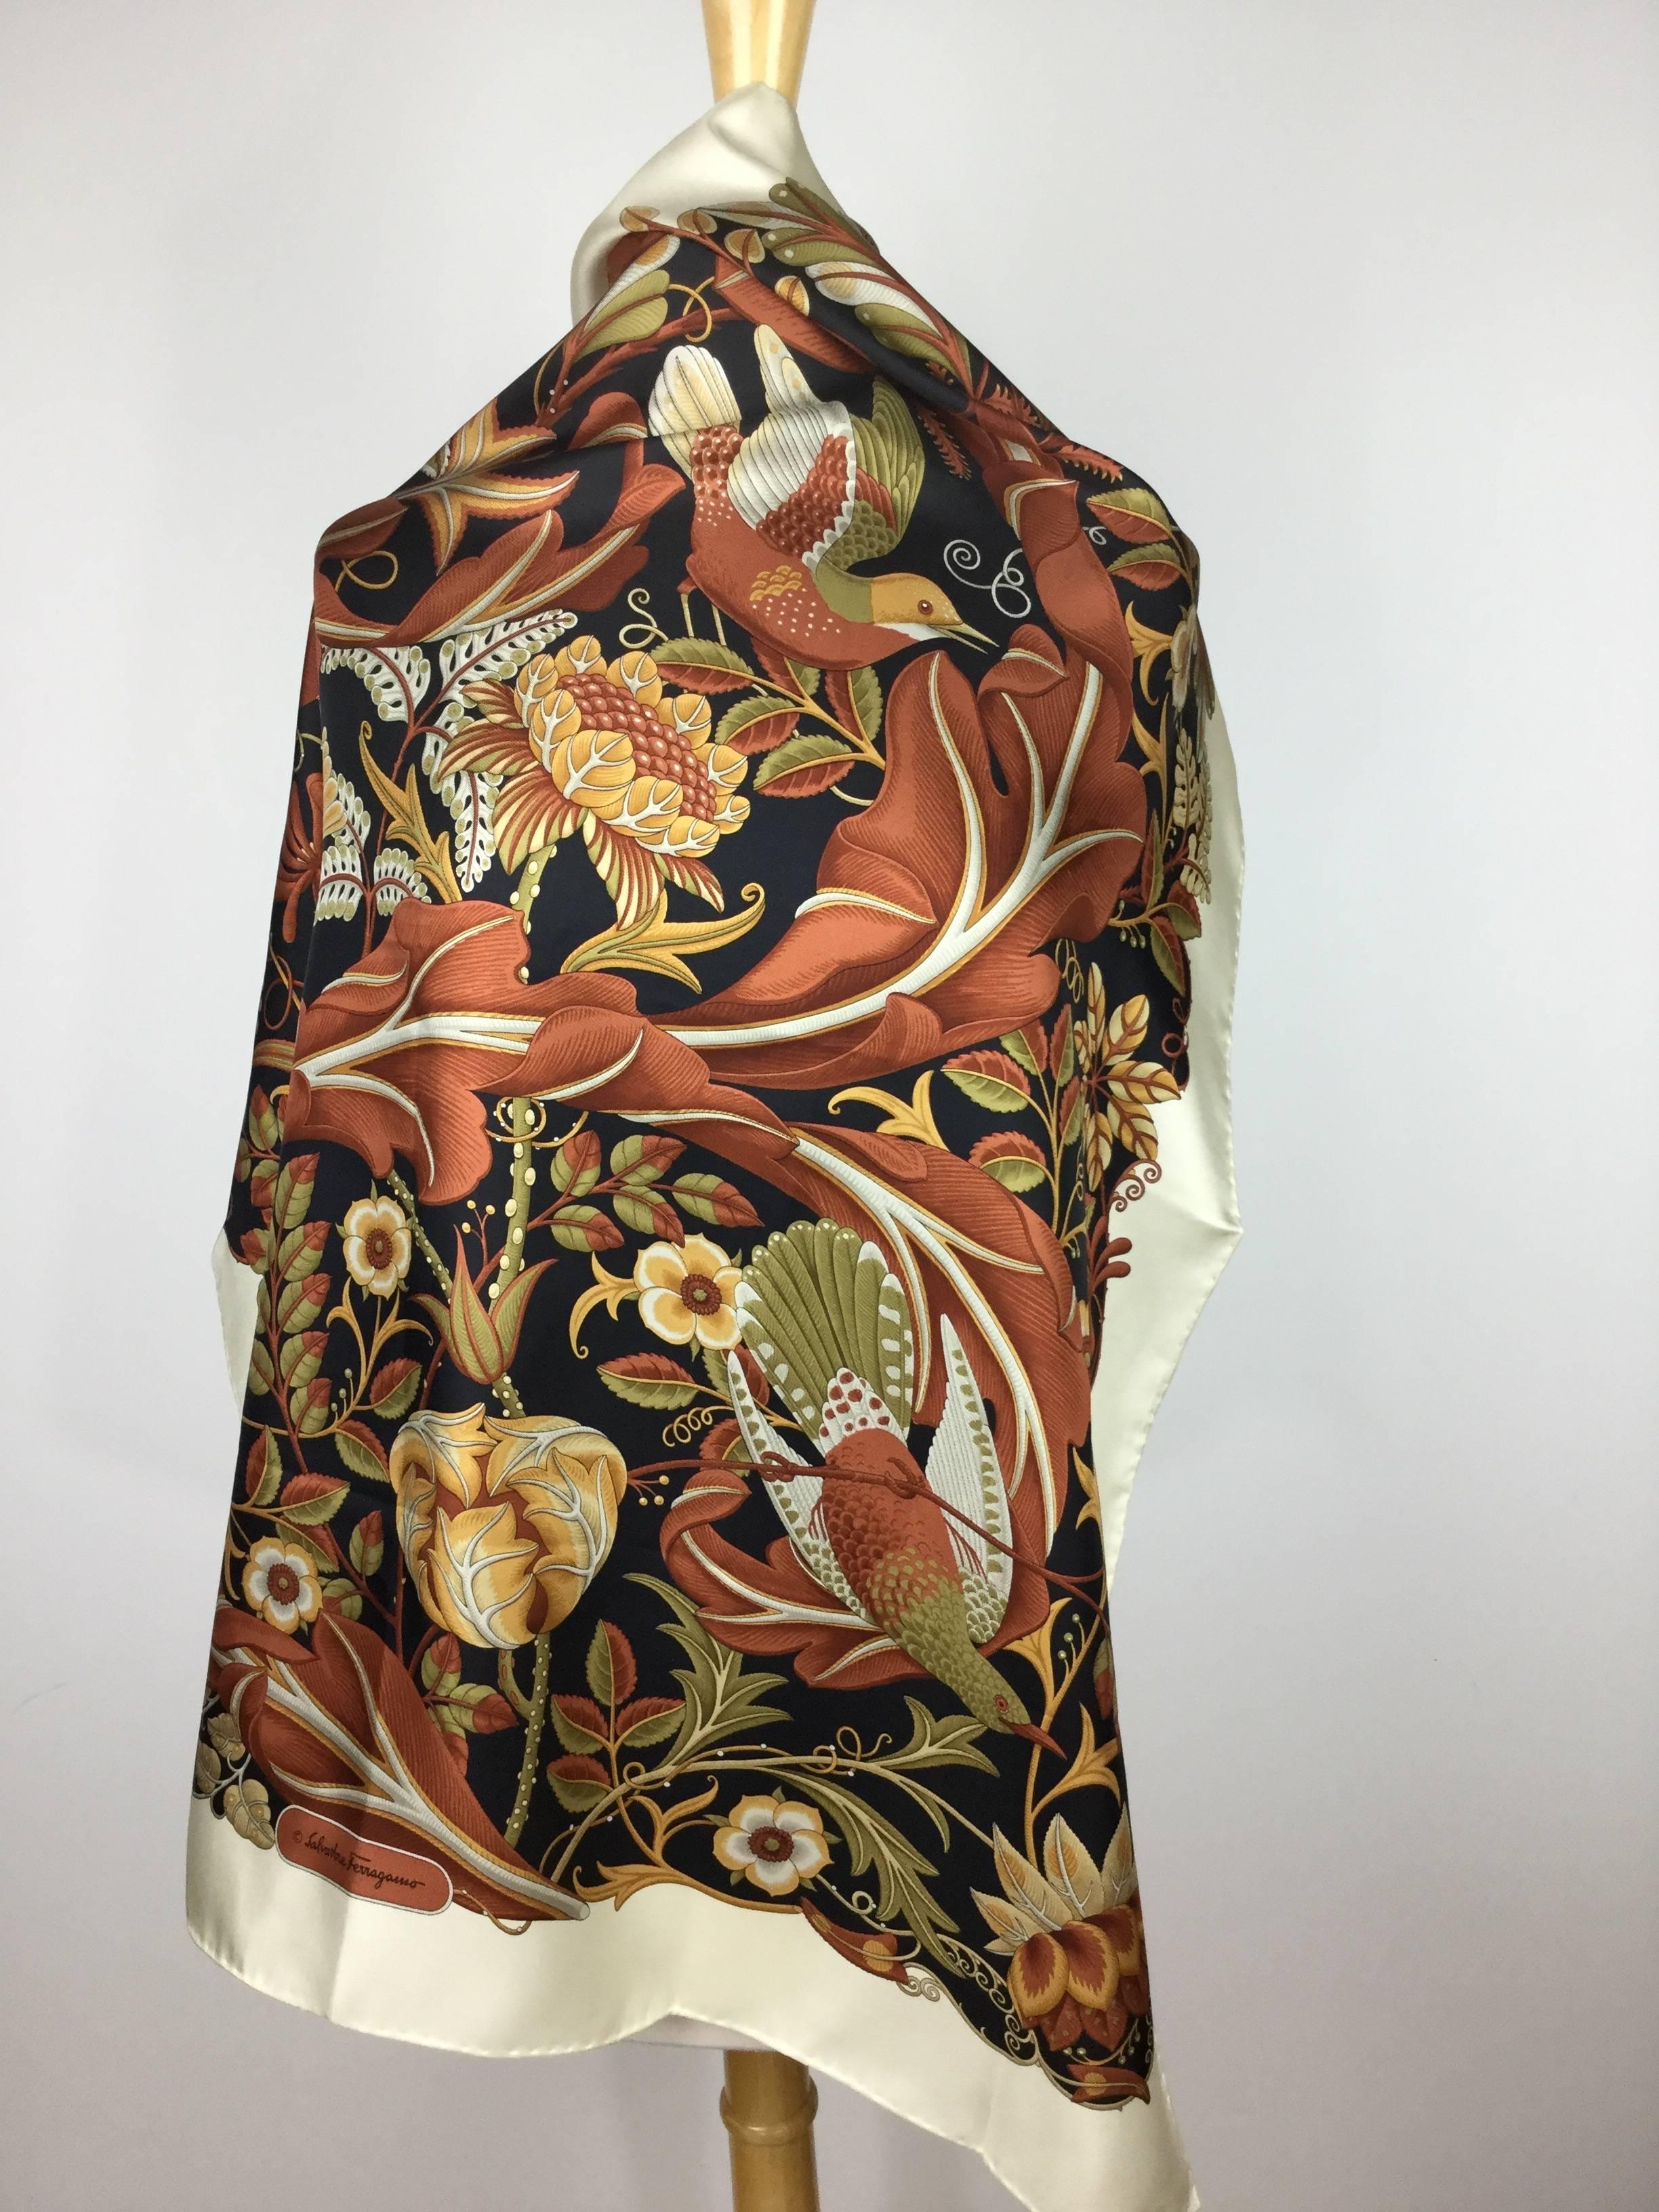 The is such a perfect scarf for the autumn/winter season. Deep, rich, colors and incredible attention to detail in the flora and fauna. Each bird is totally unique. The flowers and leaves are so intricate.  Superb quality. Hand rolled edges.